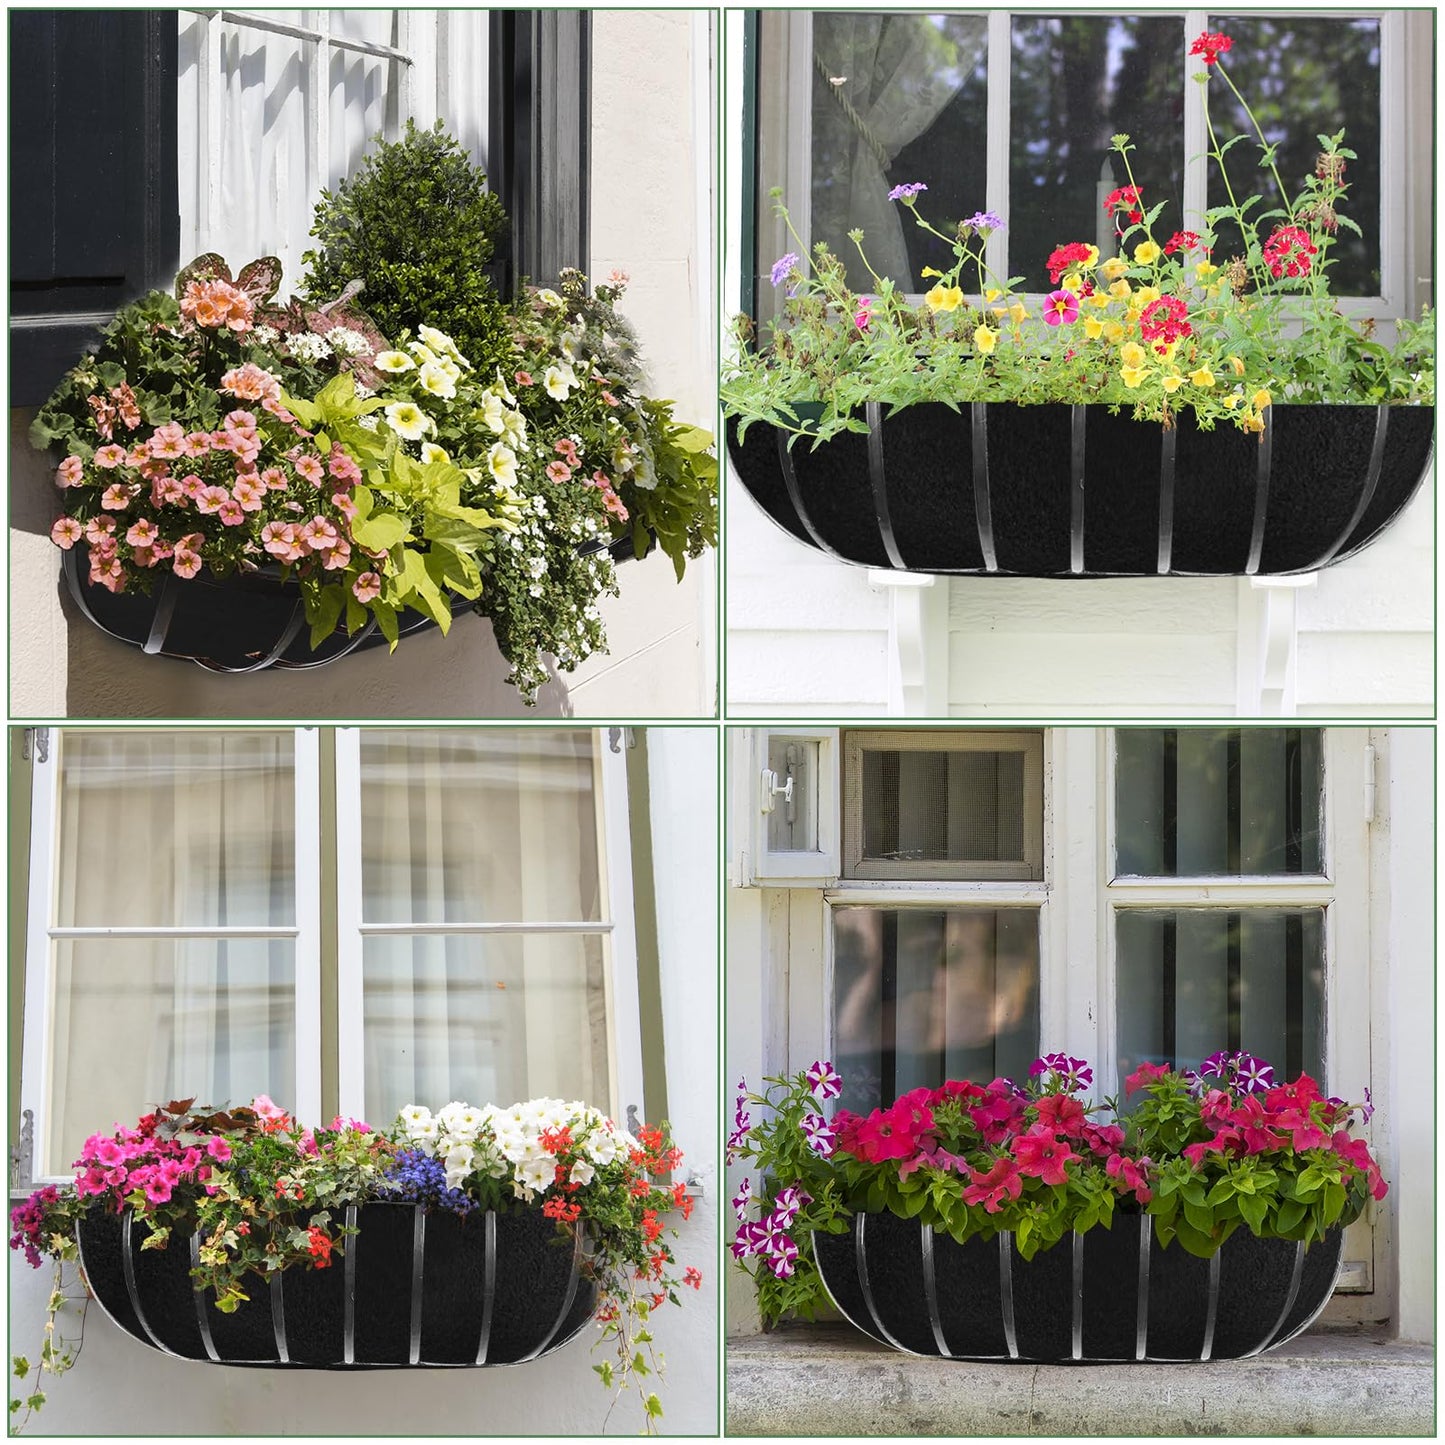 3PCS 36 Inch Planter Basket Liners Fabric Window Box Liners Felt Trough Planter Liner Replacement Black Flower Basket Liner Non-Woven Hanging Plant Liner for Planters Garden Fence - Avoid Bird Nesting